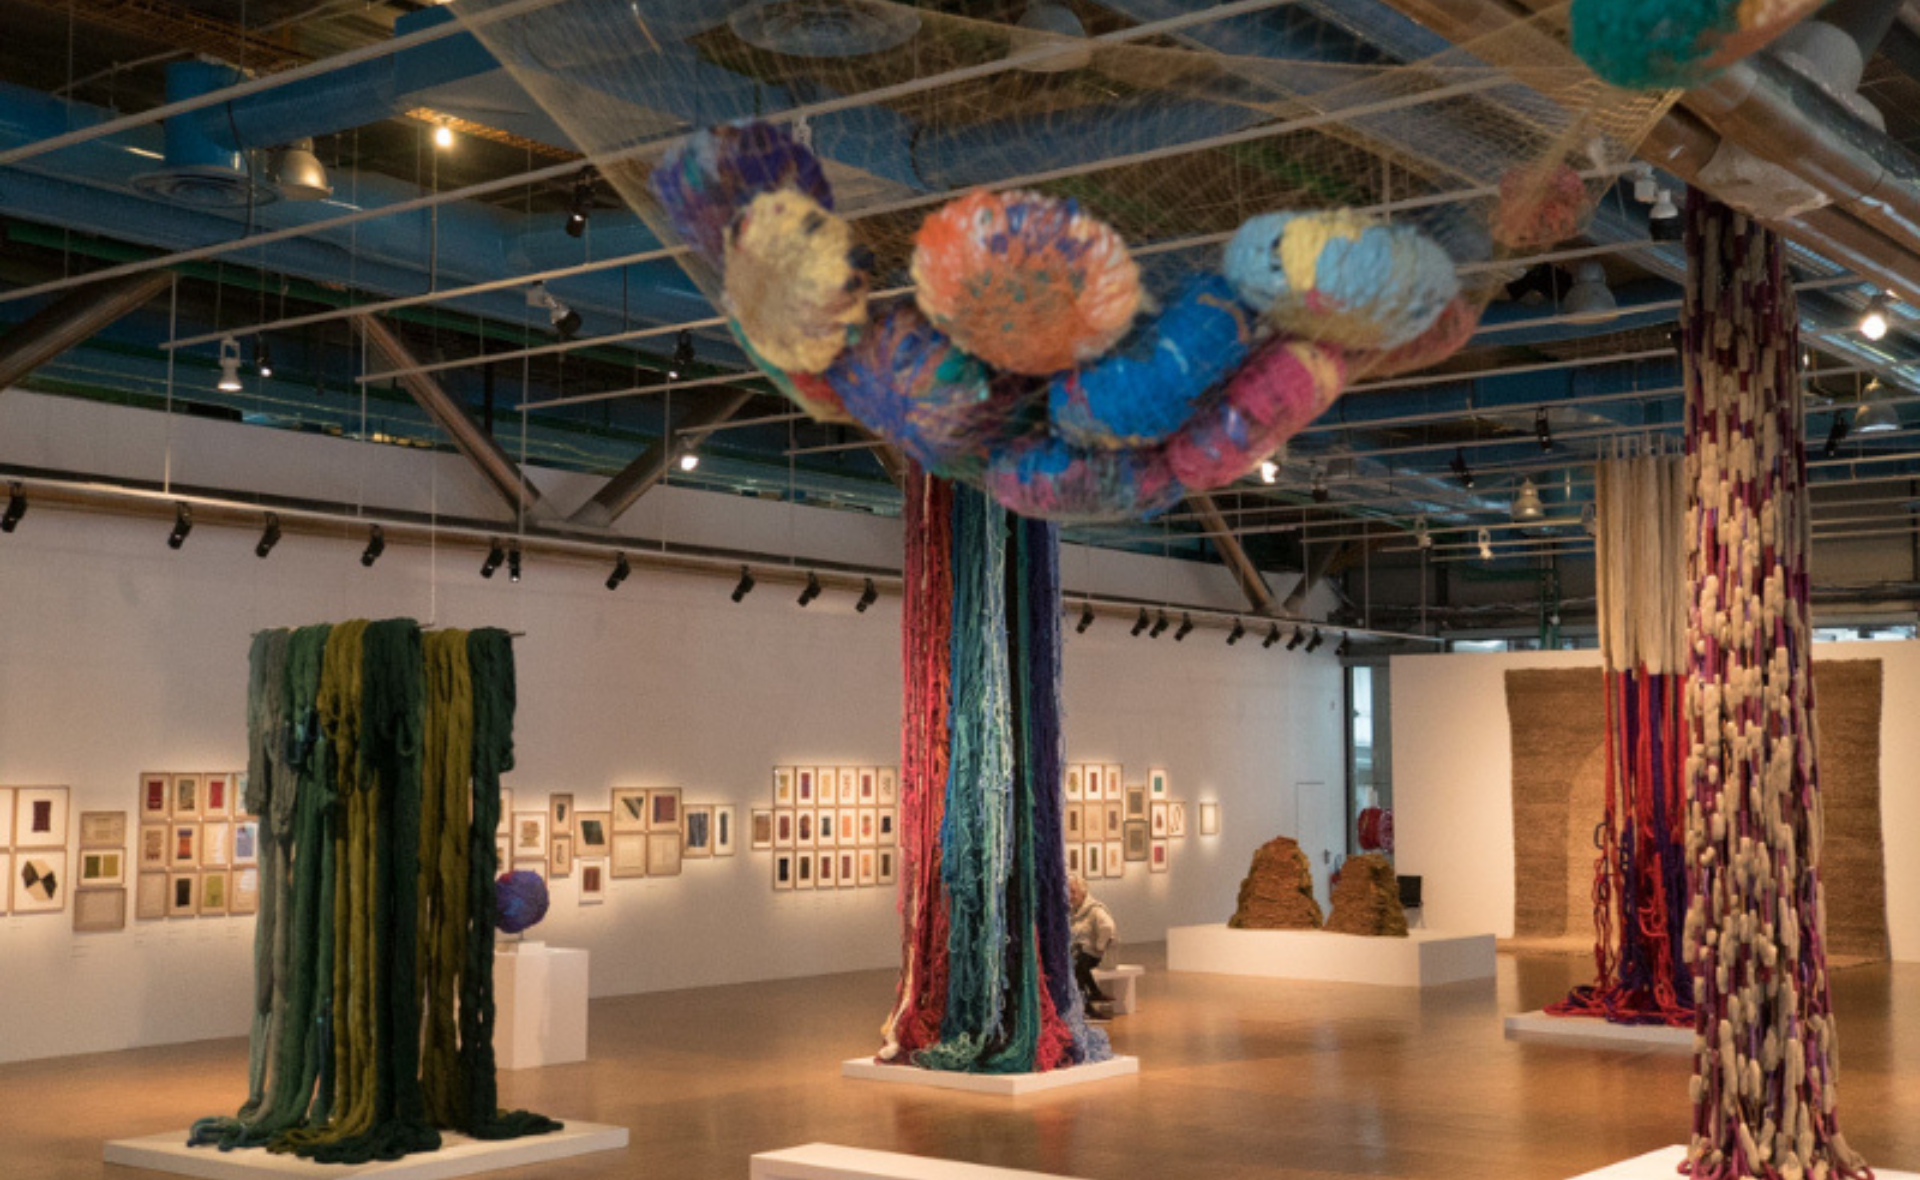 Textile Artists The Innovation Of A New Material World In Craftsmanship.